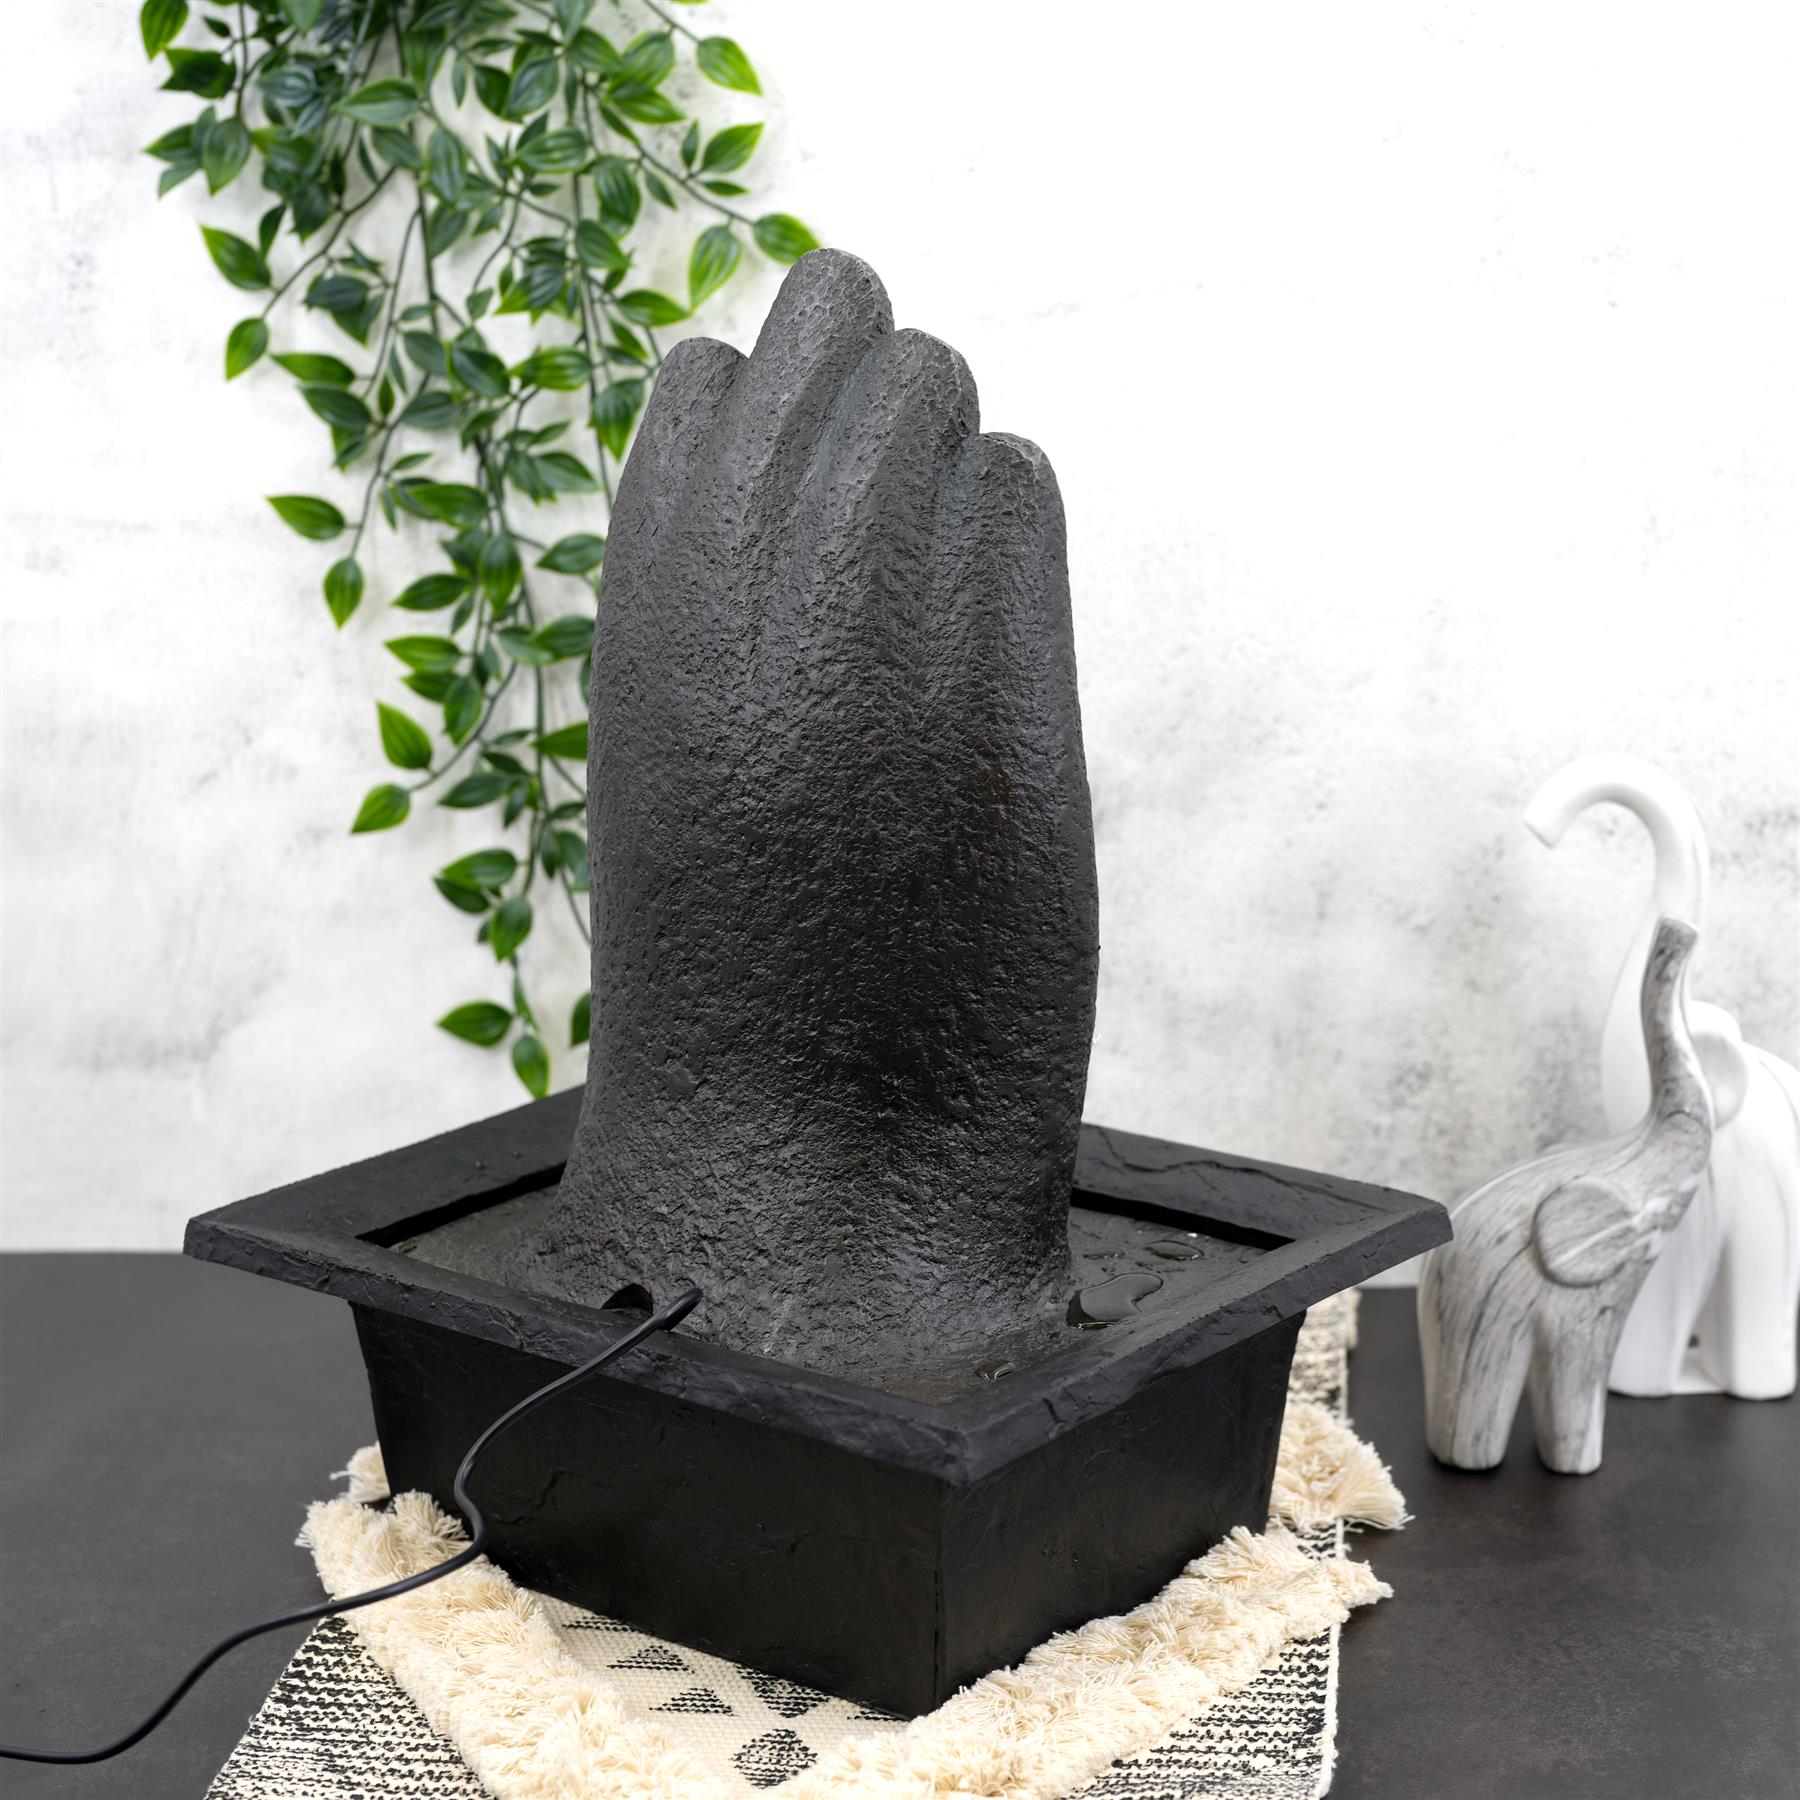 Hand Buddha Fountain LED Tabletop Indoor by GEEZY - The Magic Toy Shop